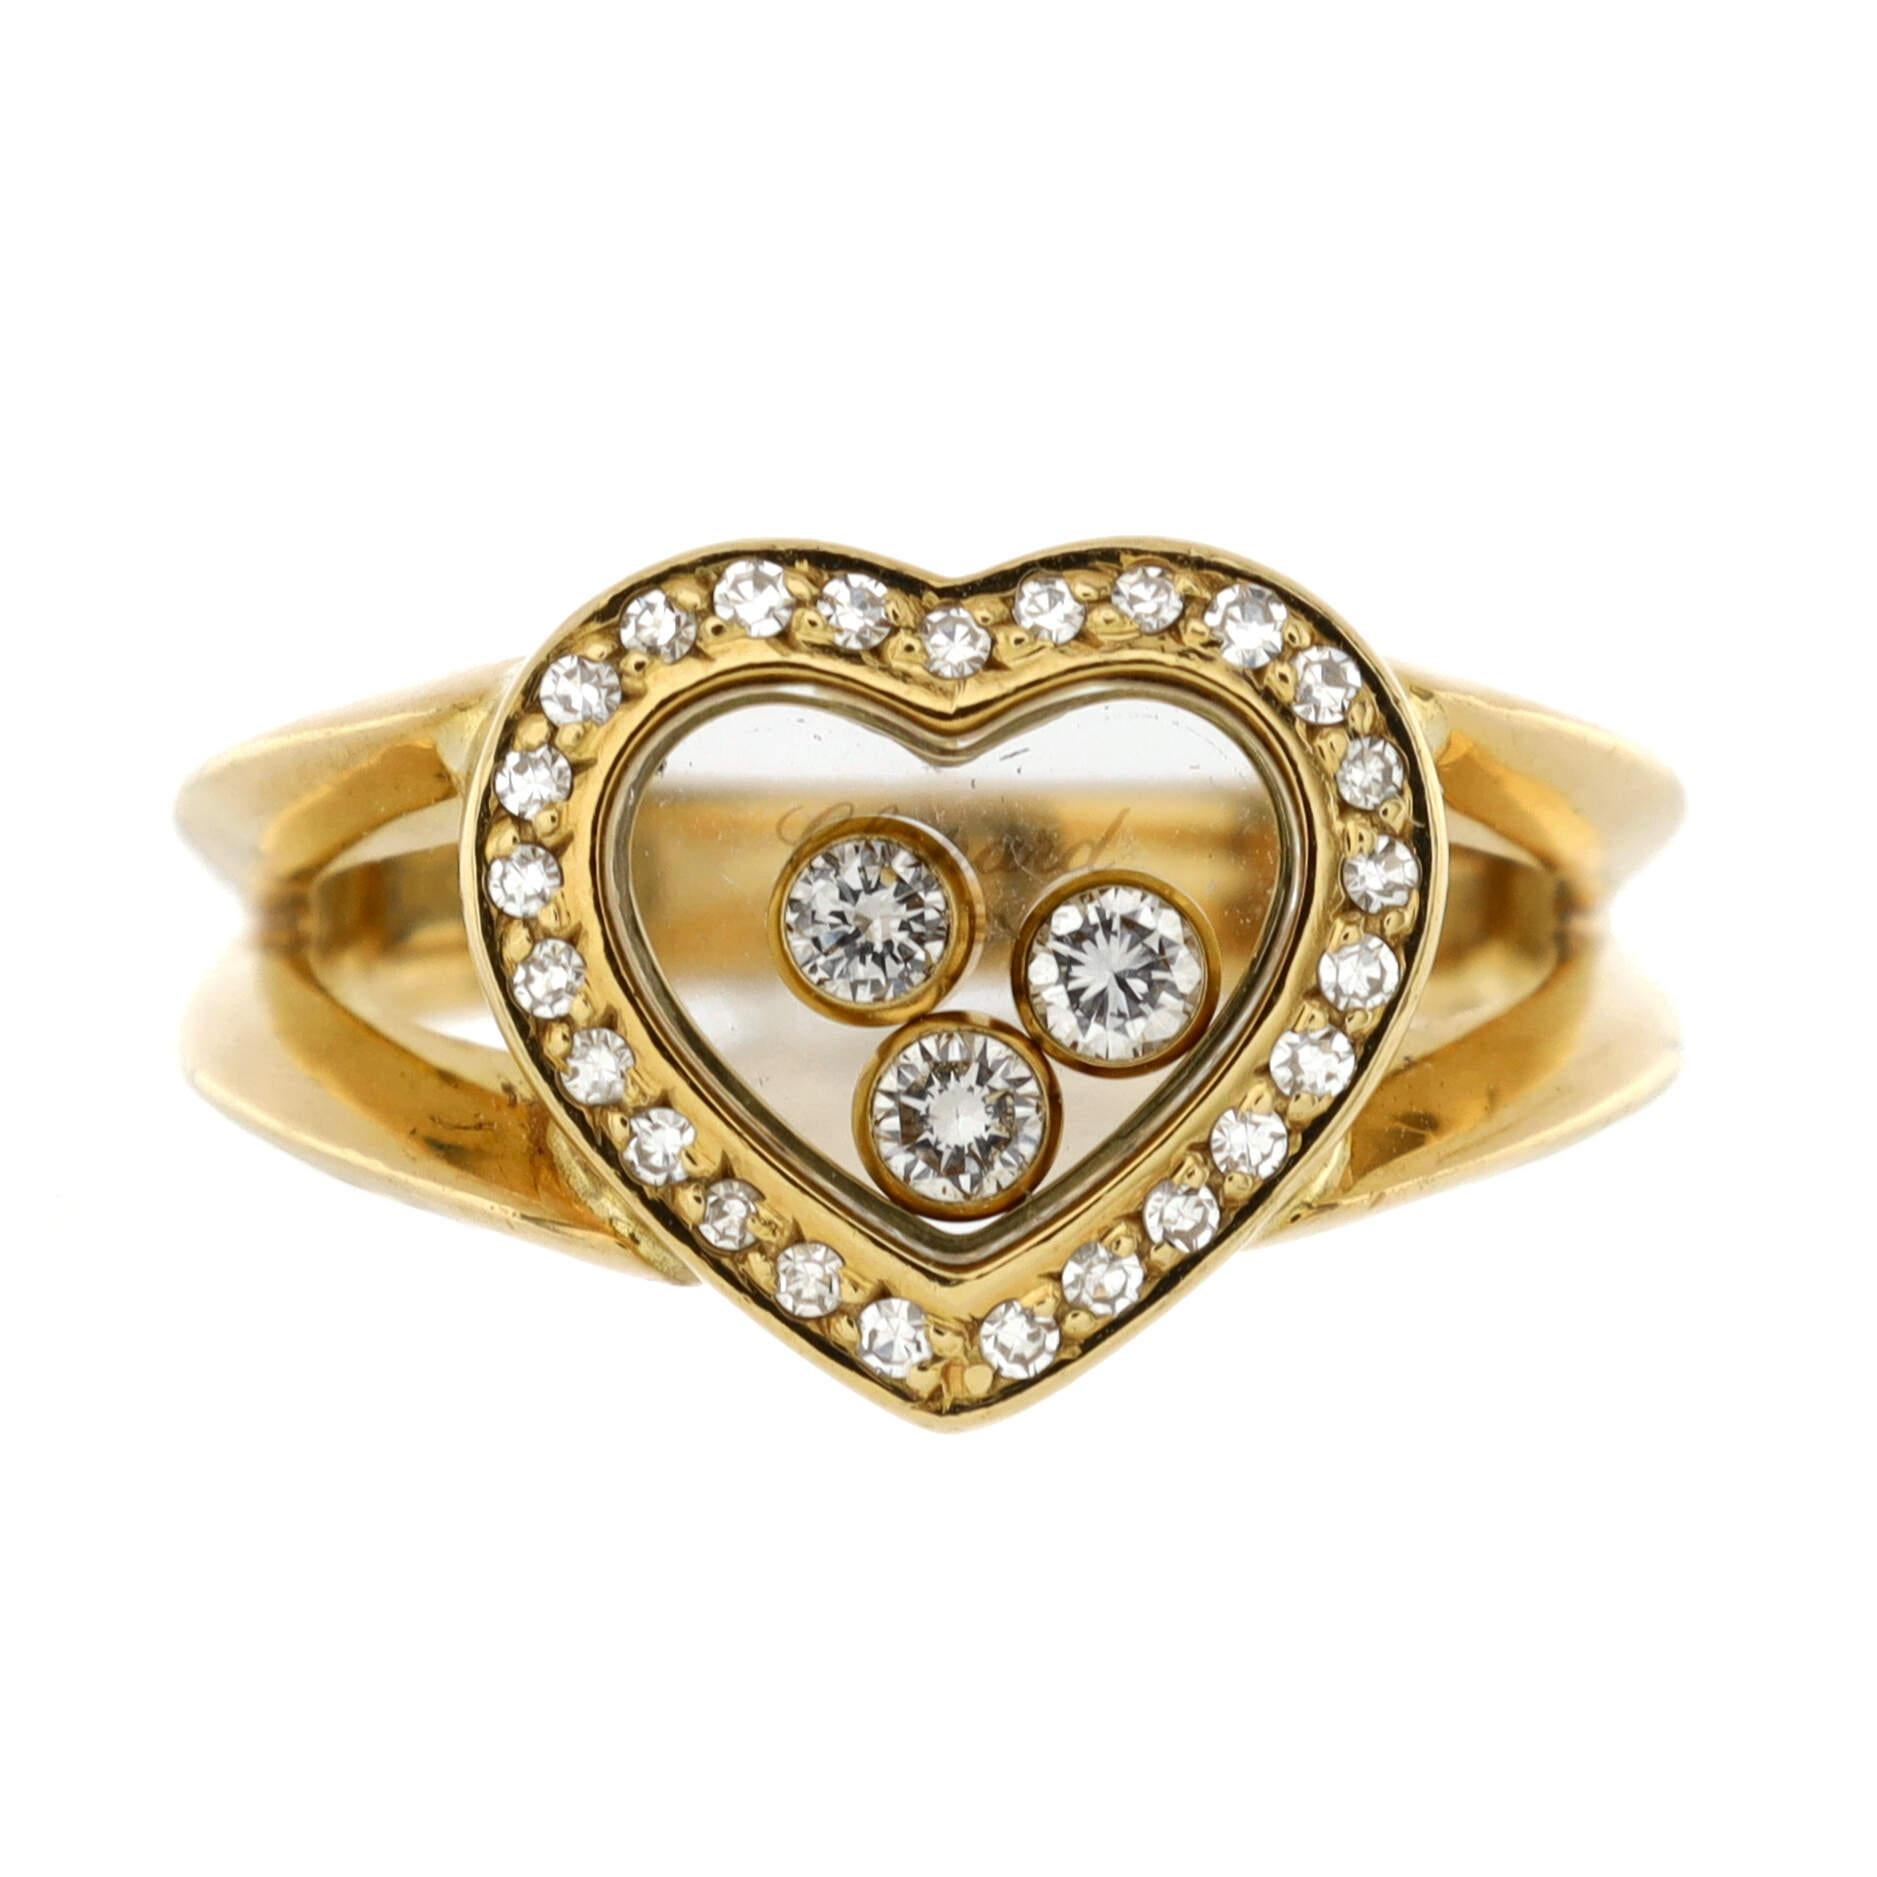 Condition: Good. Moderately heavy wear throughout.
Accessories: No Accessories
Measurements: Size: 4.75 - 49, Width: 3.00 mm
Designer: Chopard
Model: Happy Diamonds Heart Ring 18K Yellow Gold with Diamonds and 3 Floating Diamonds
Exterior Color: